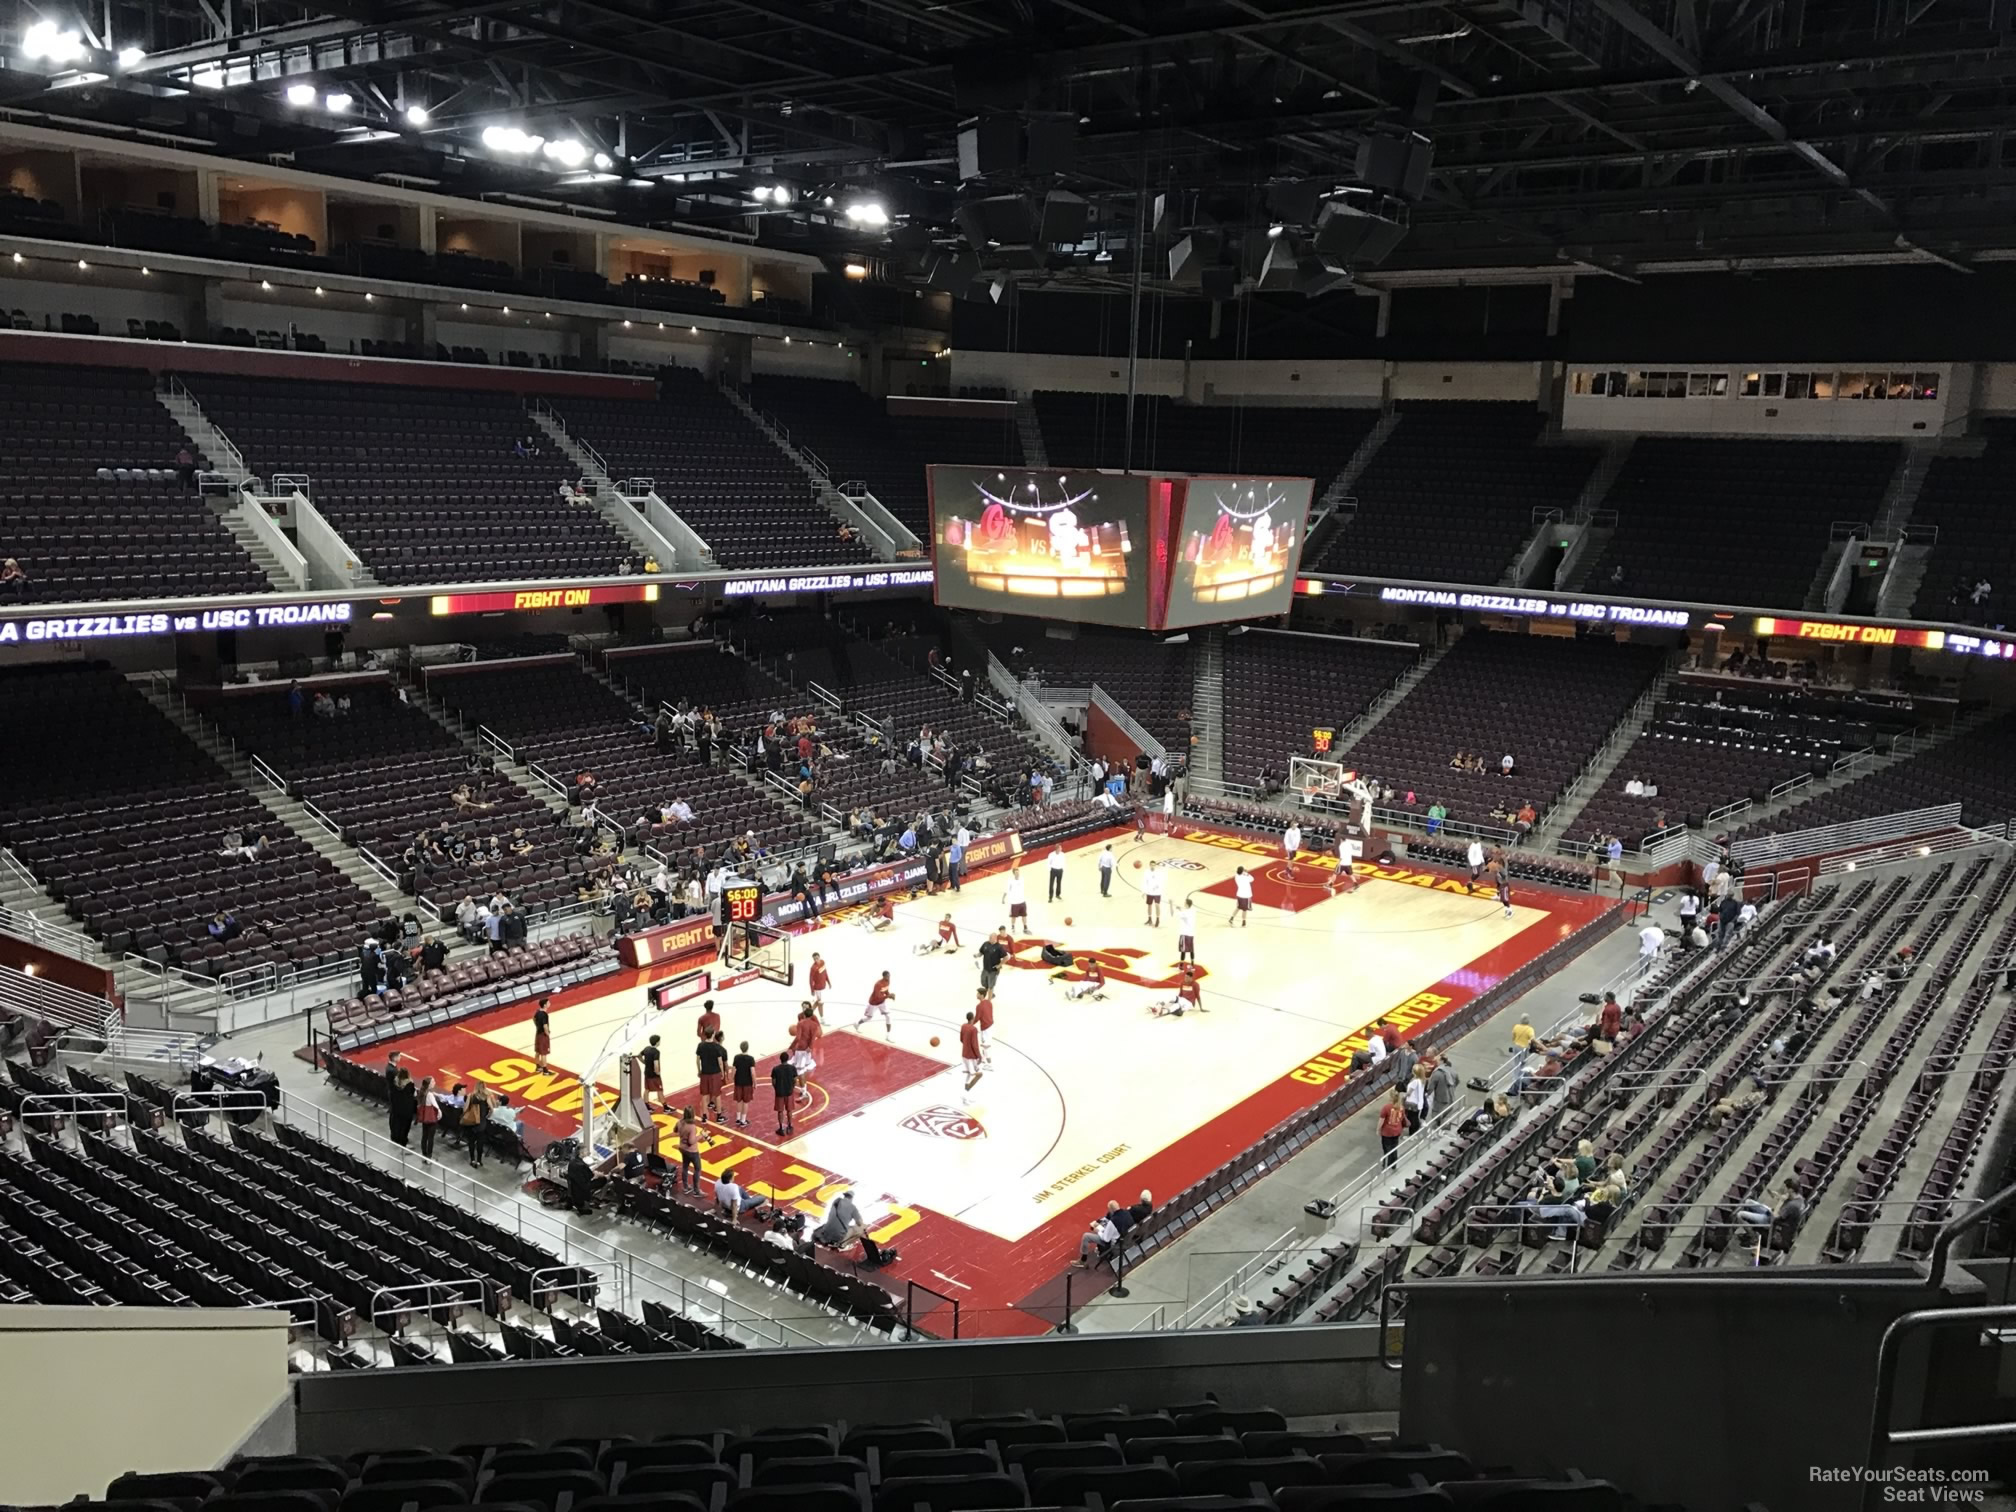 section 201, row 10 seat view  - galen center